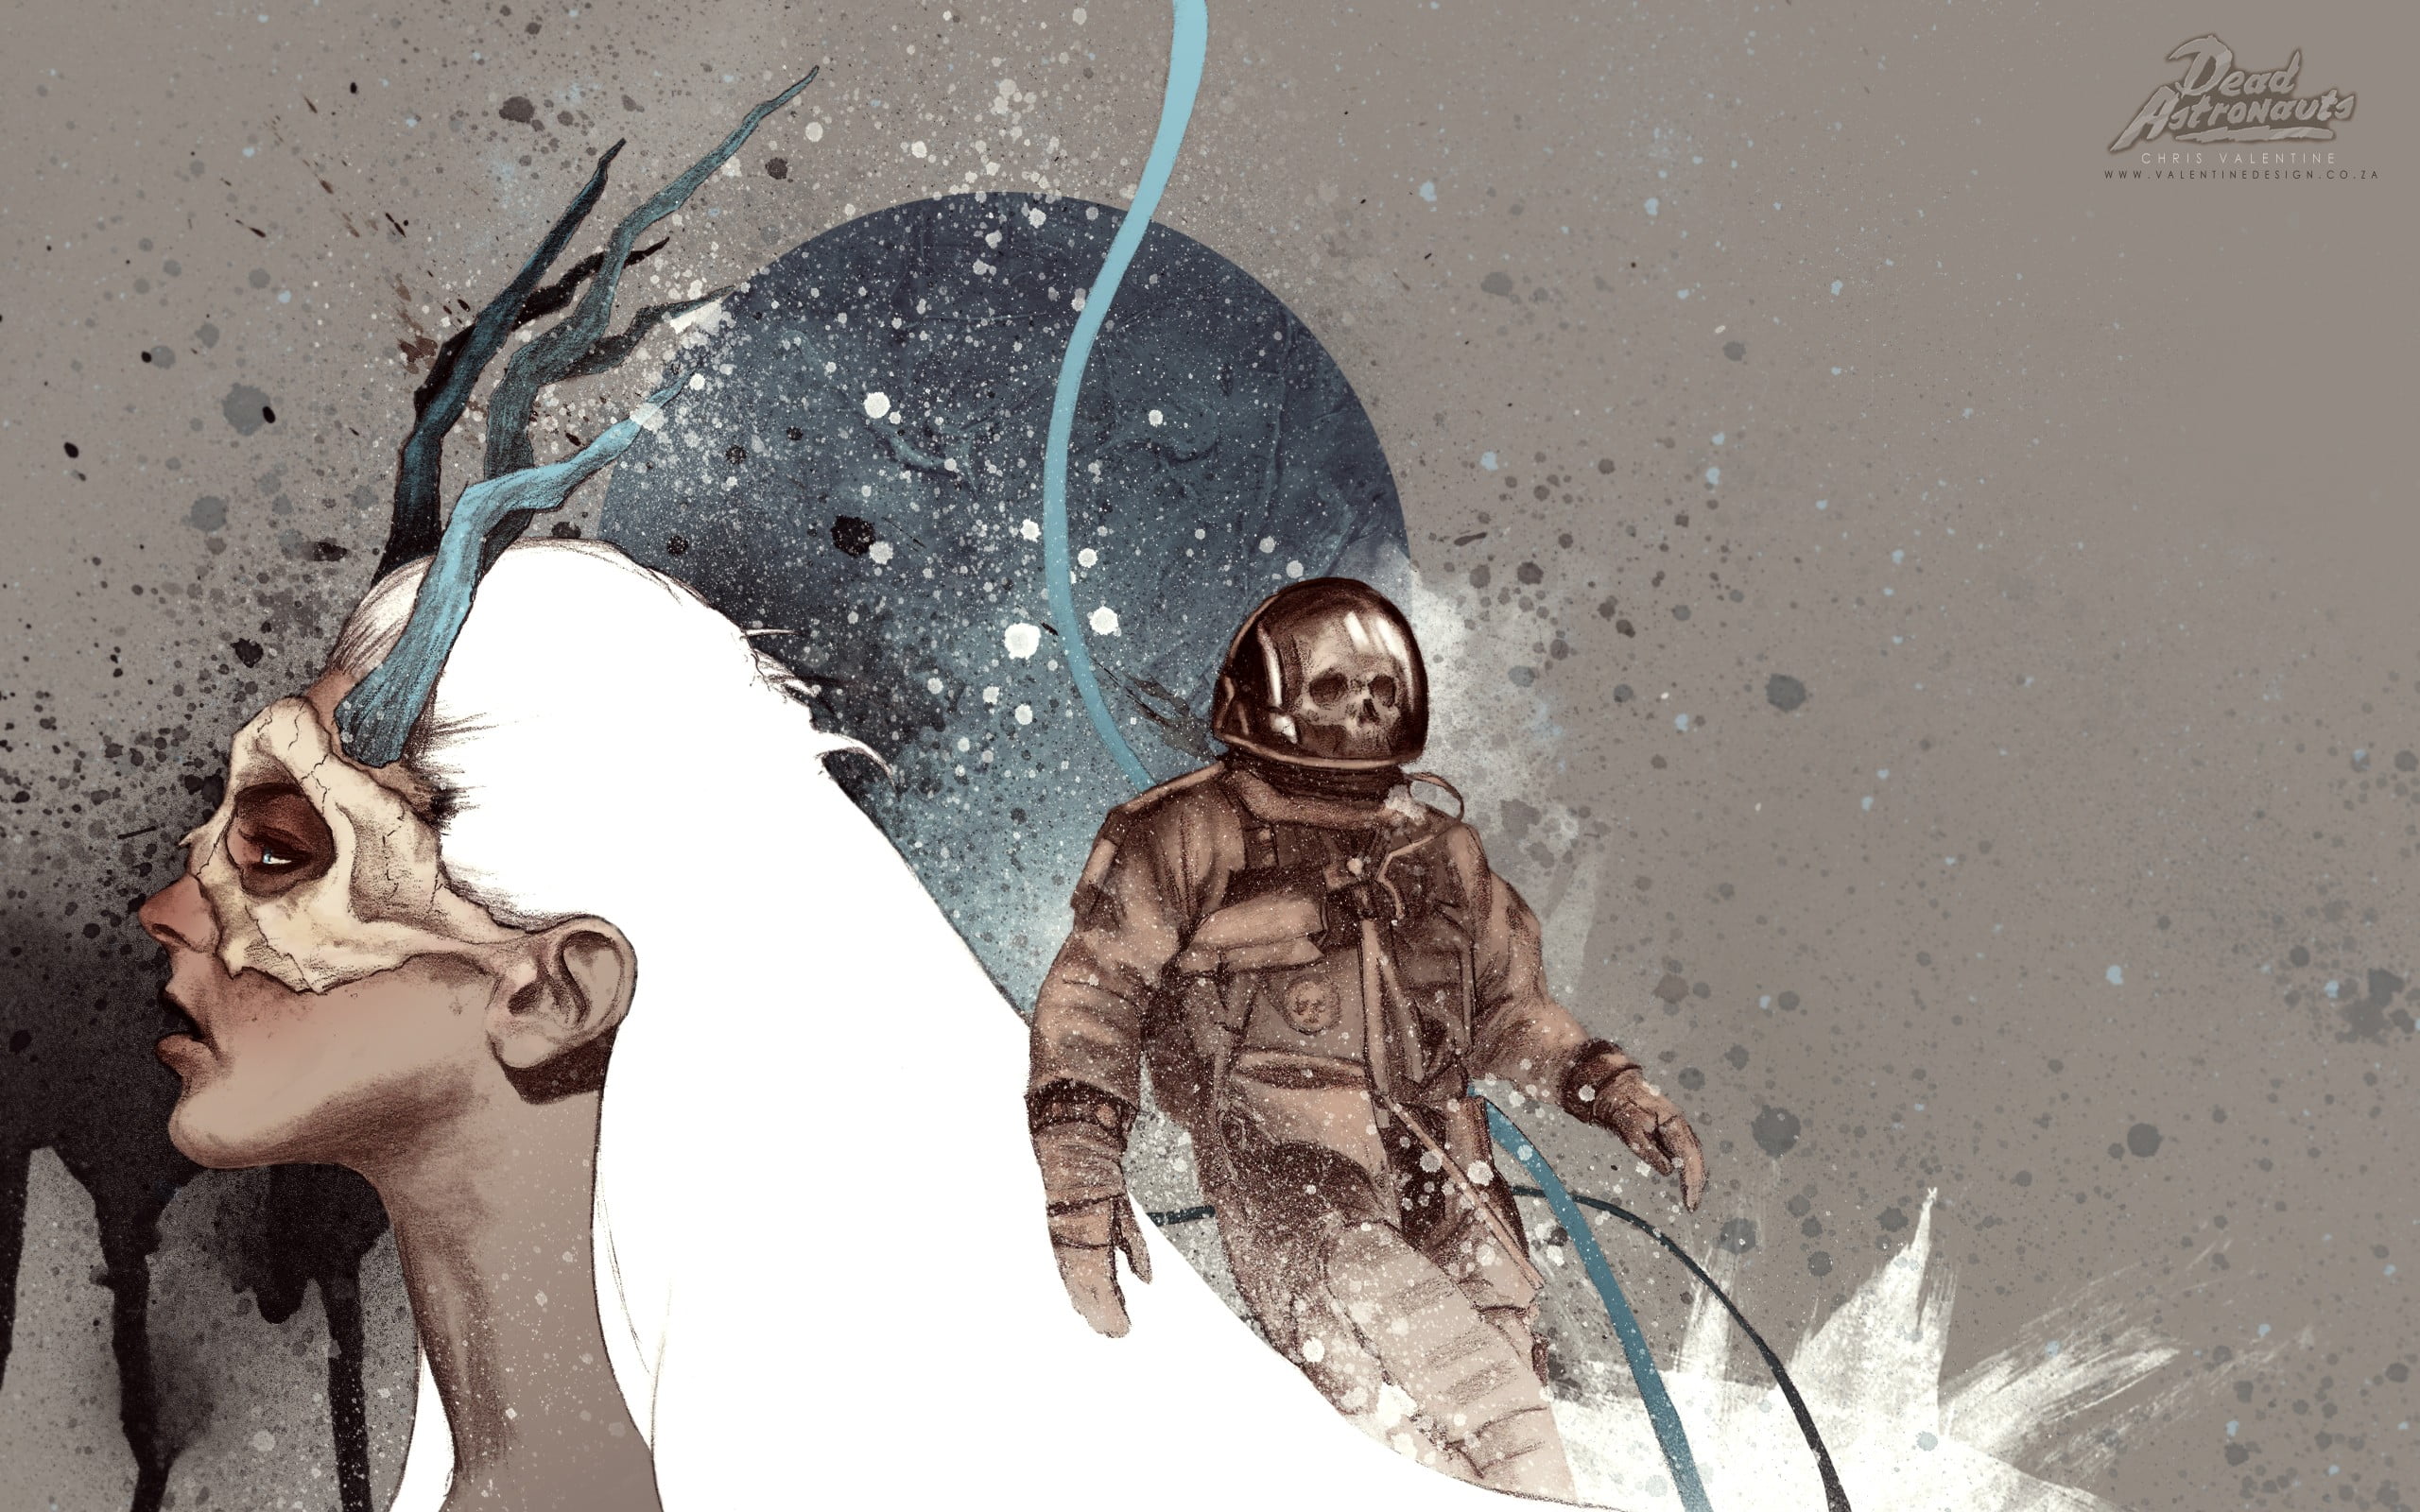 Astronaut with woman wearing mask wallpaper, Dead Astronauts